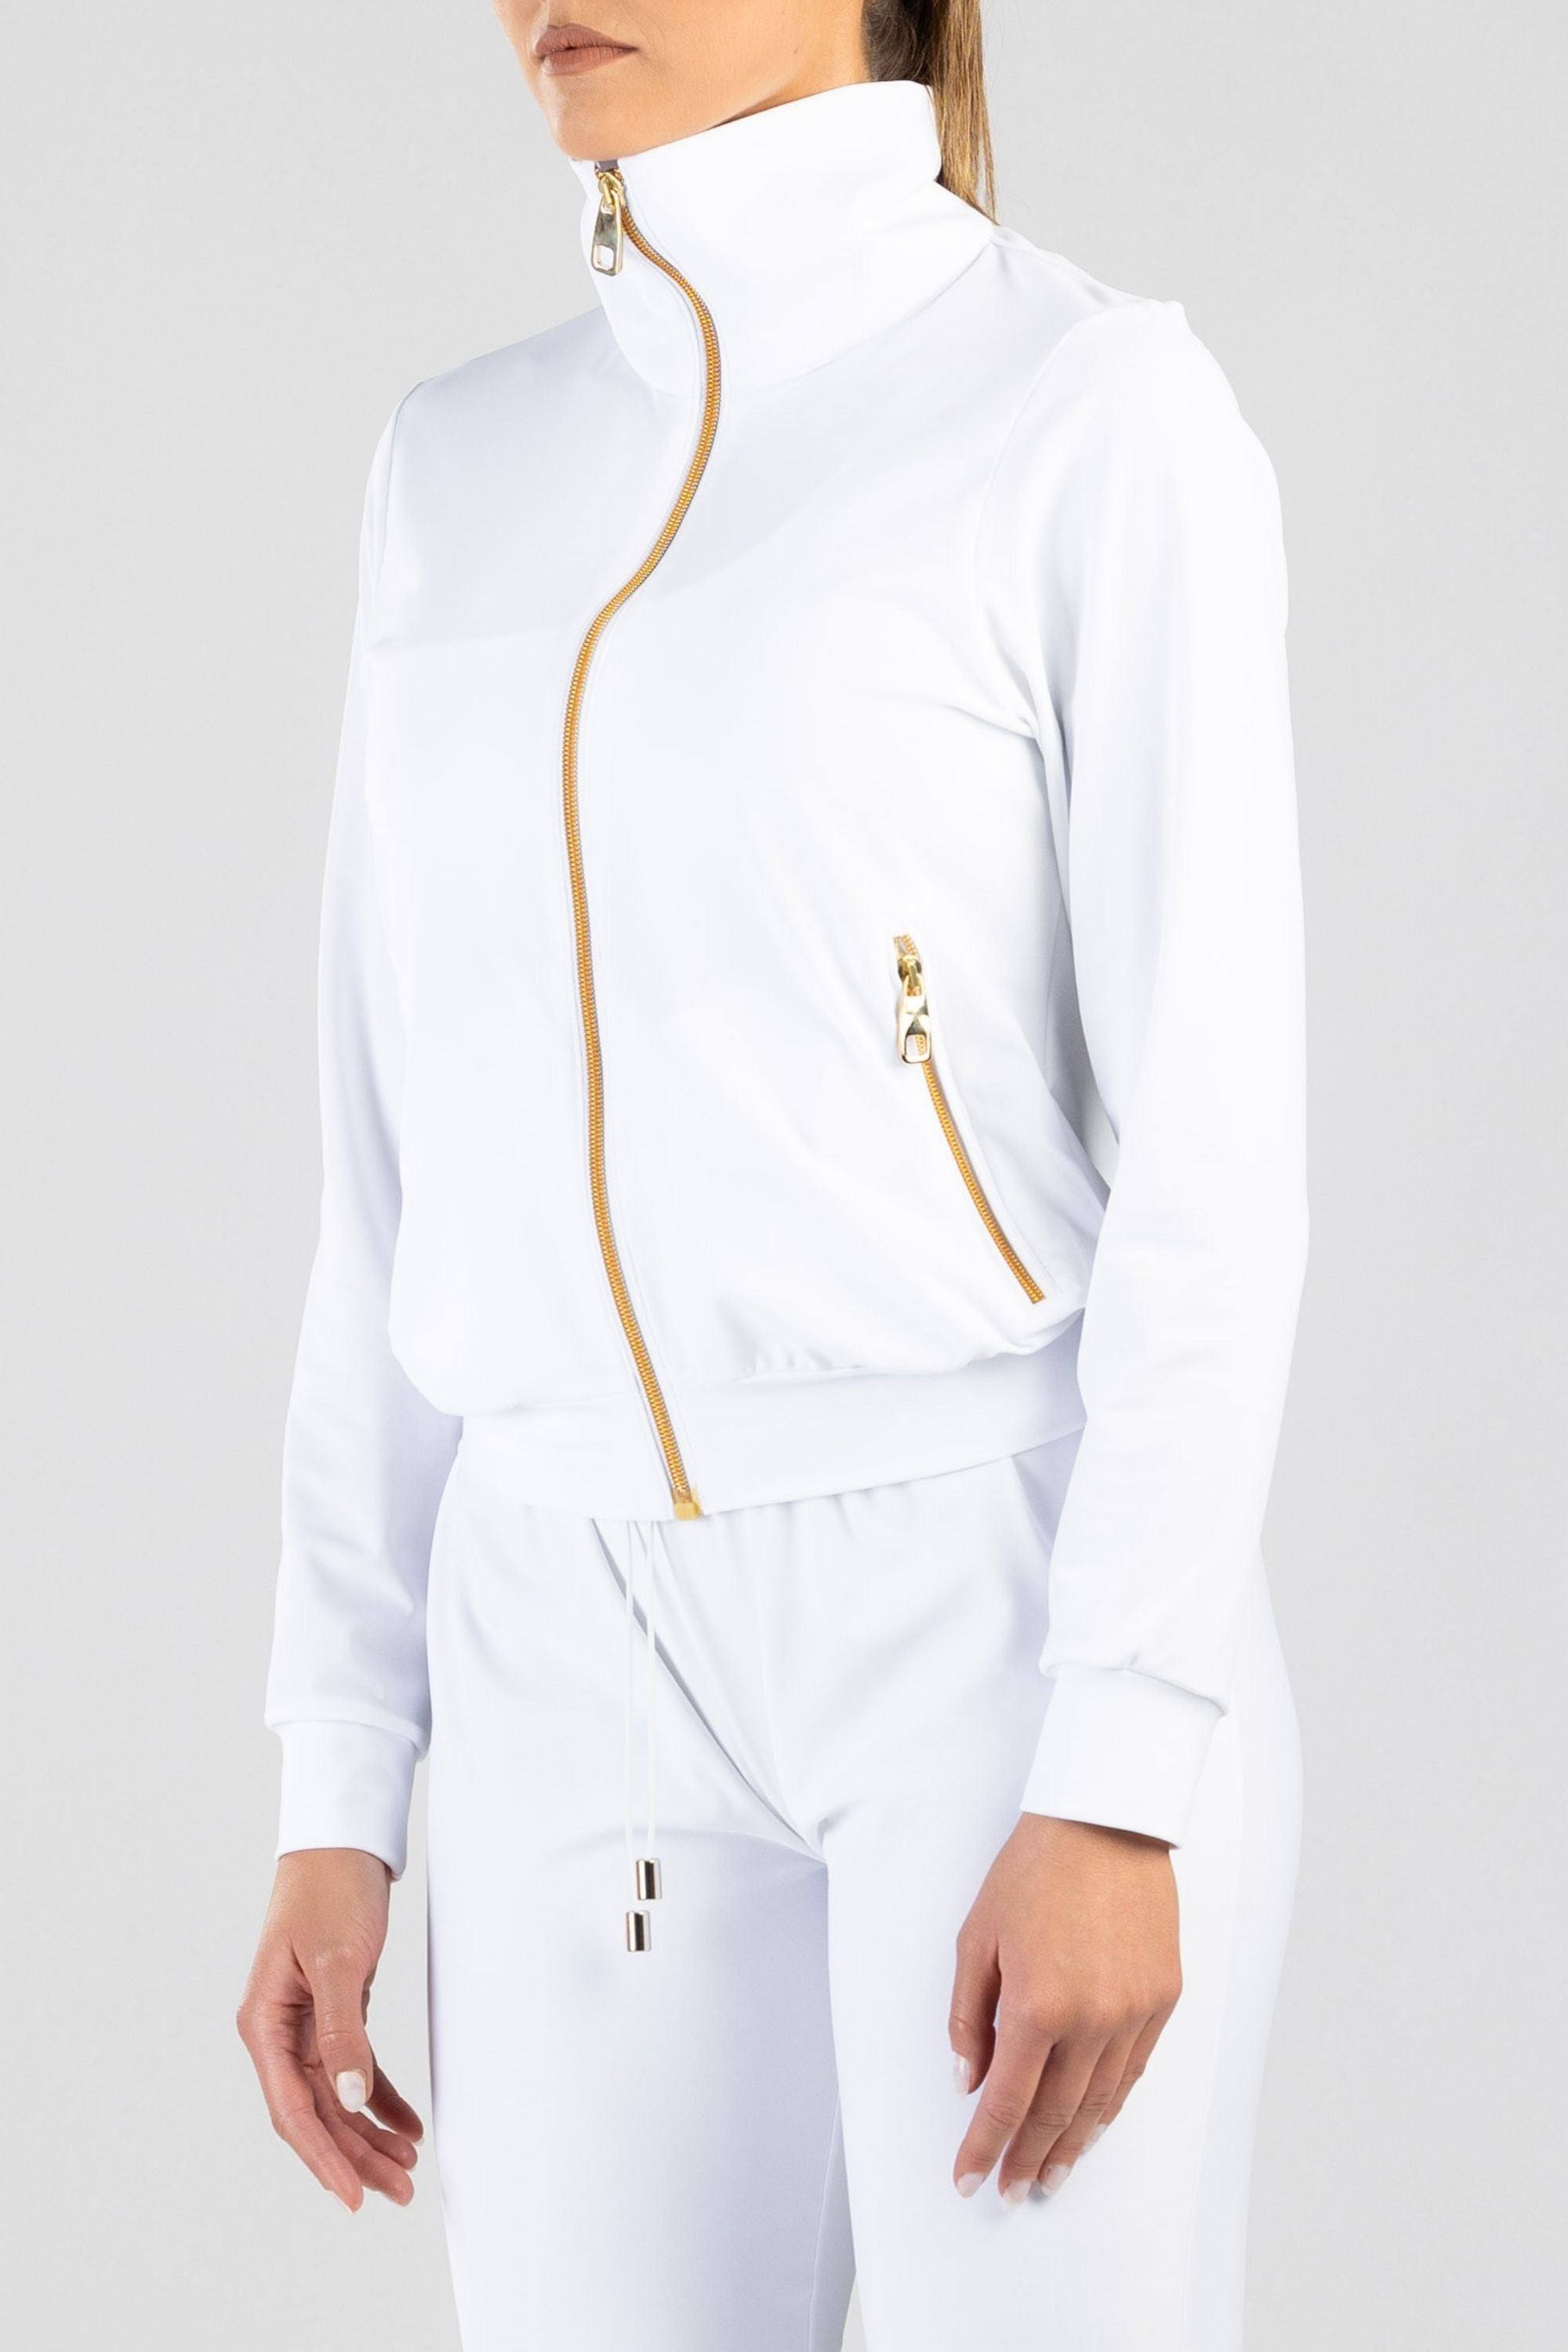 Women's Luxury Tracksuits  Find the perfect outfit for any occasion -  Antoninias